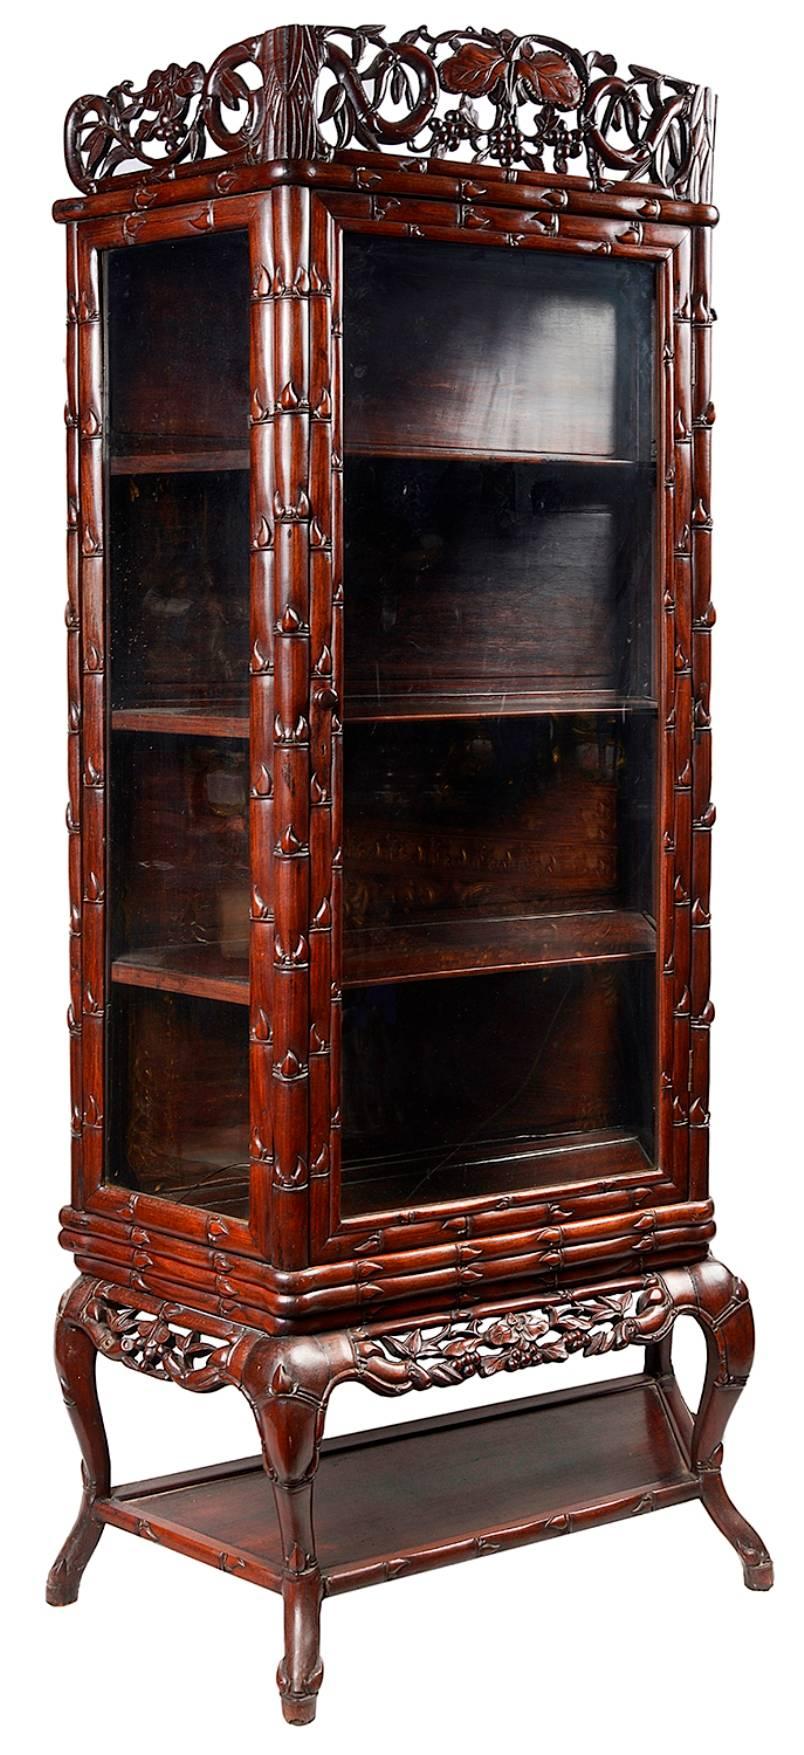 A good quality late 19th century Chinese hardwood display cabinet or vitrine. Having beautifully hand-carved scrolling vine leaves and faux bamboo to the show wood. Having a glazed door opening to reveal two wooden shelves within. Raised on carved